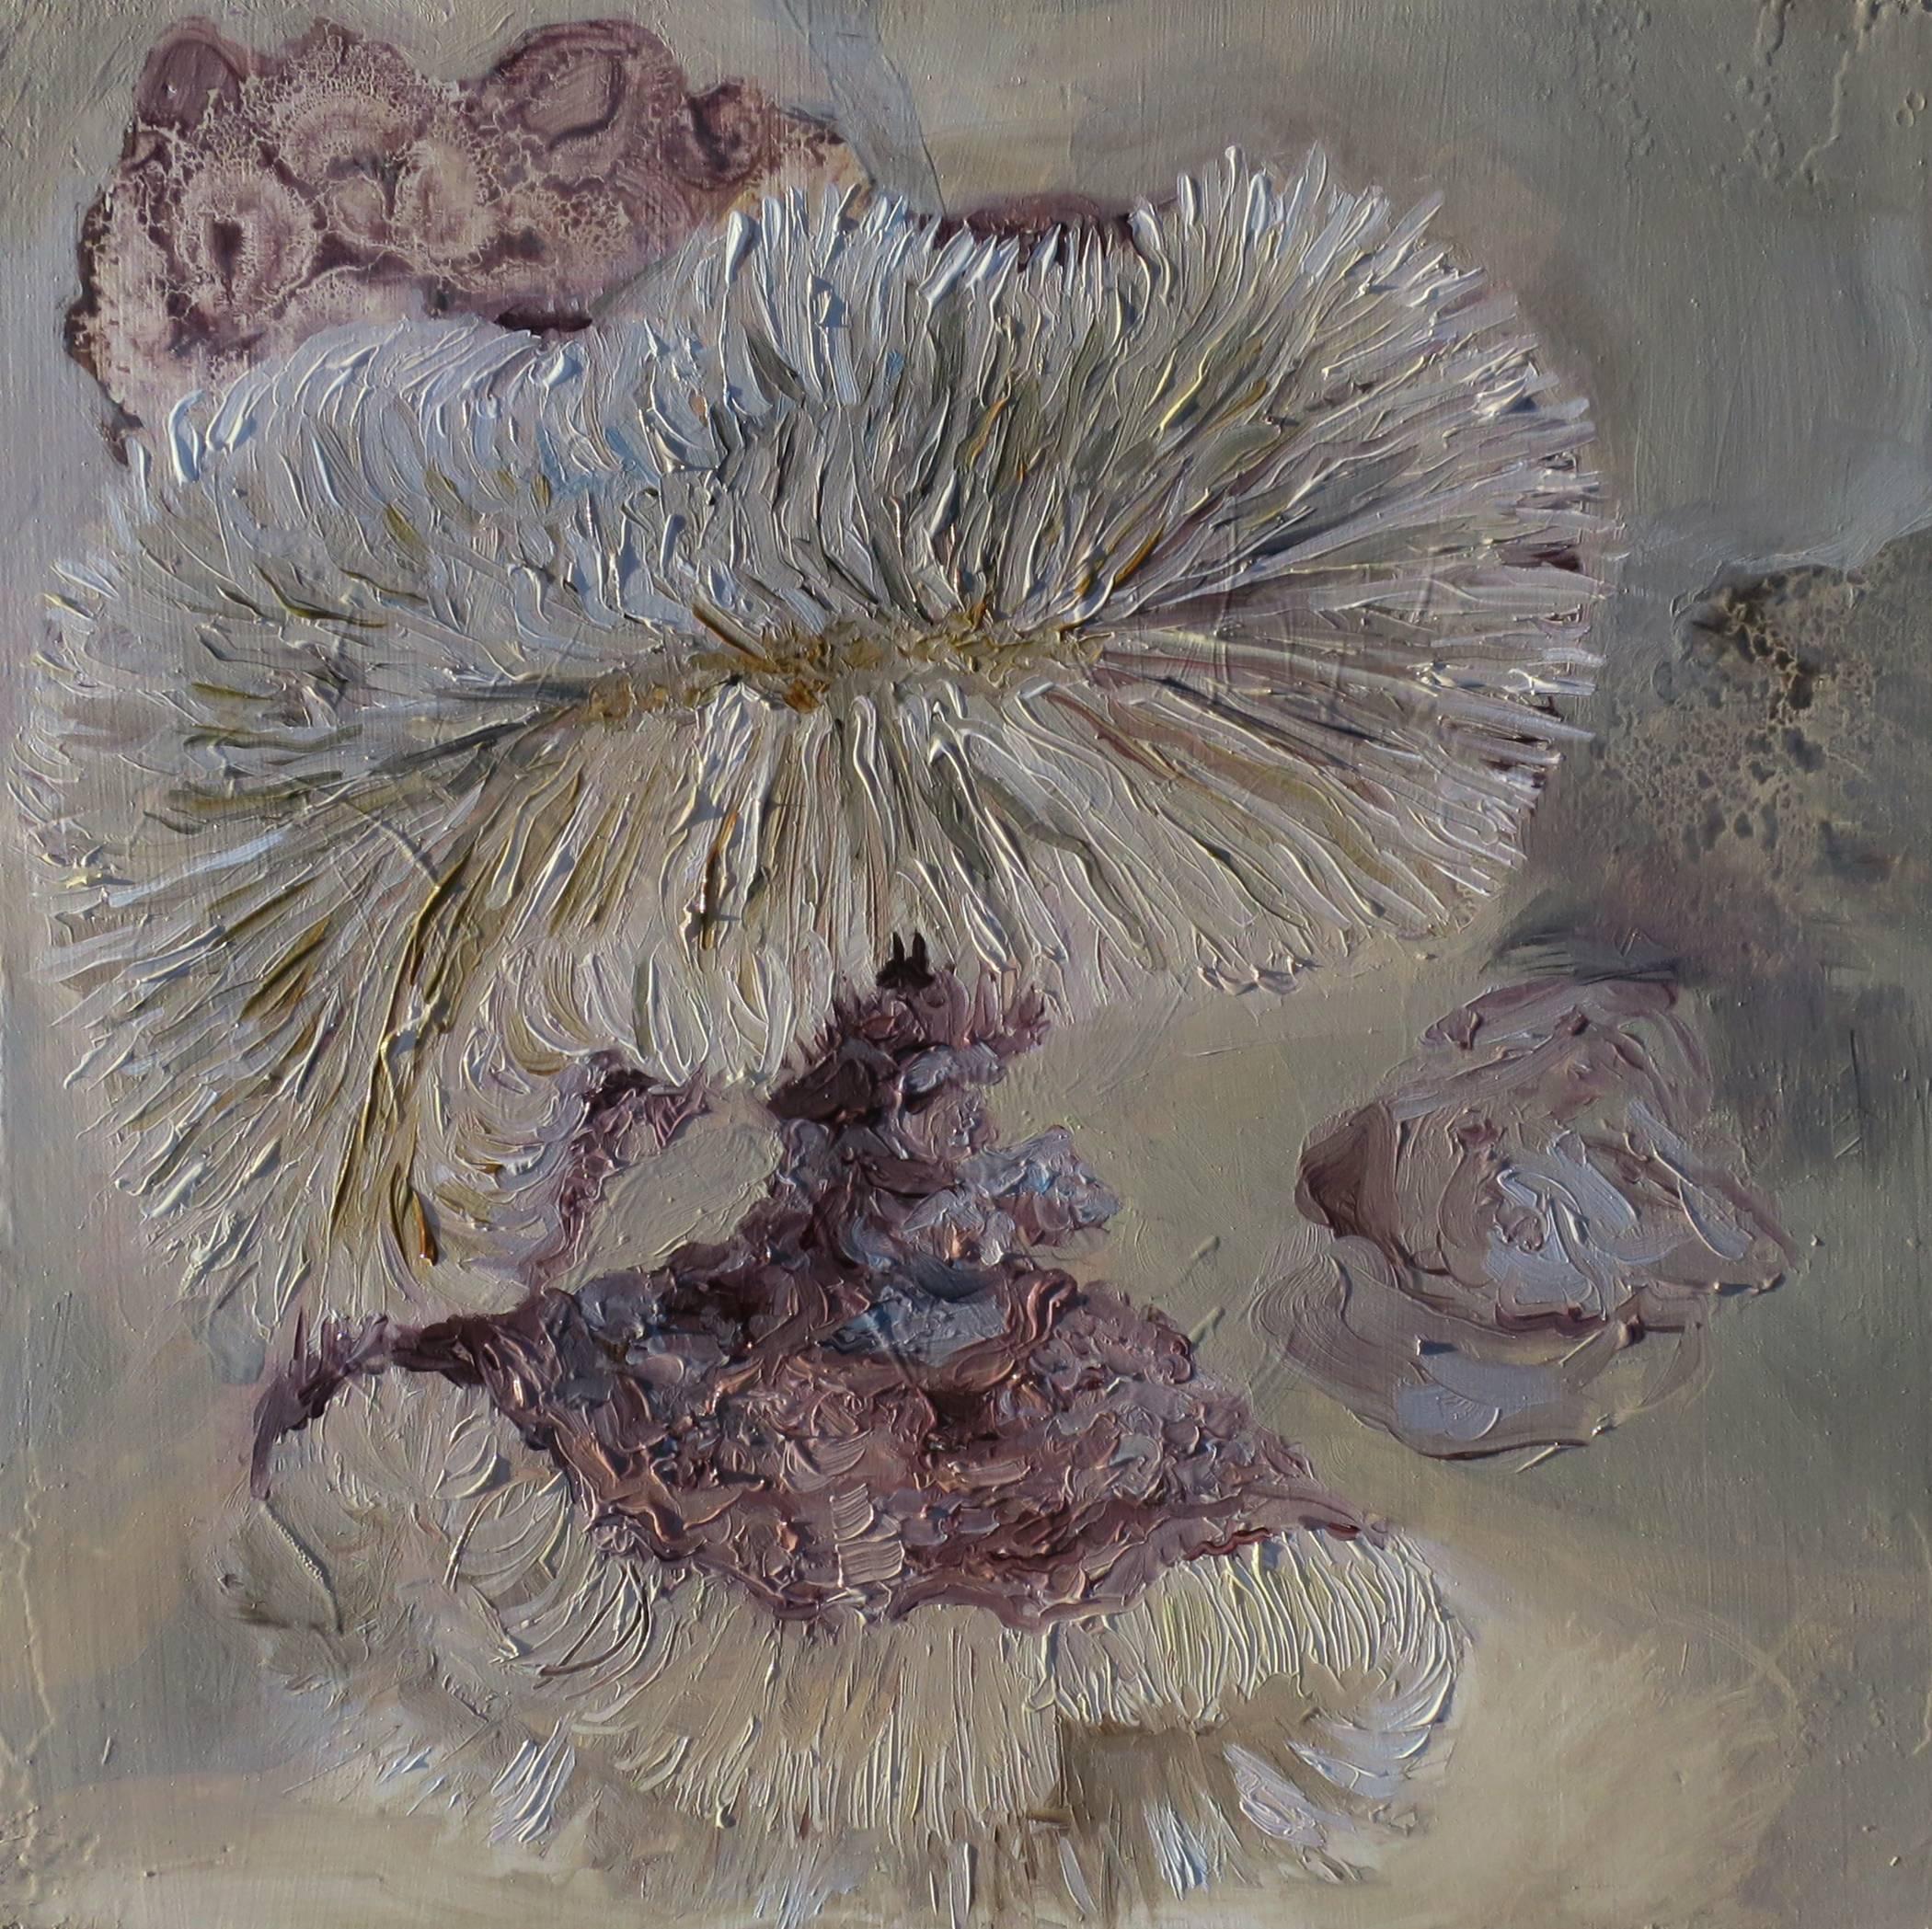 Katy Richards Abstract Painting - Contemporary Oil Painting with Sea Life Influence 